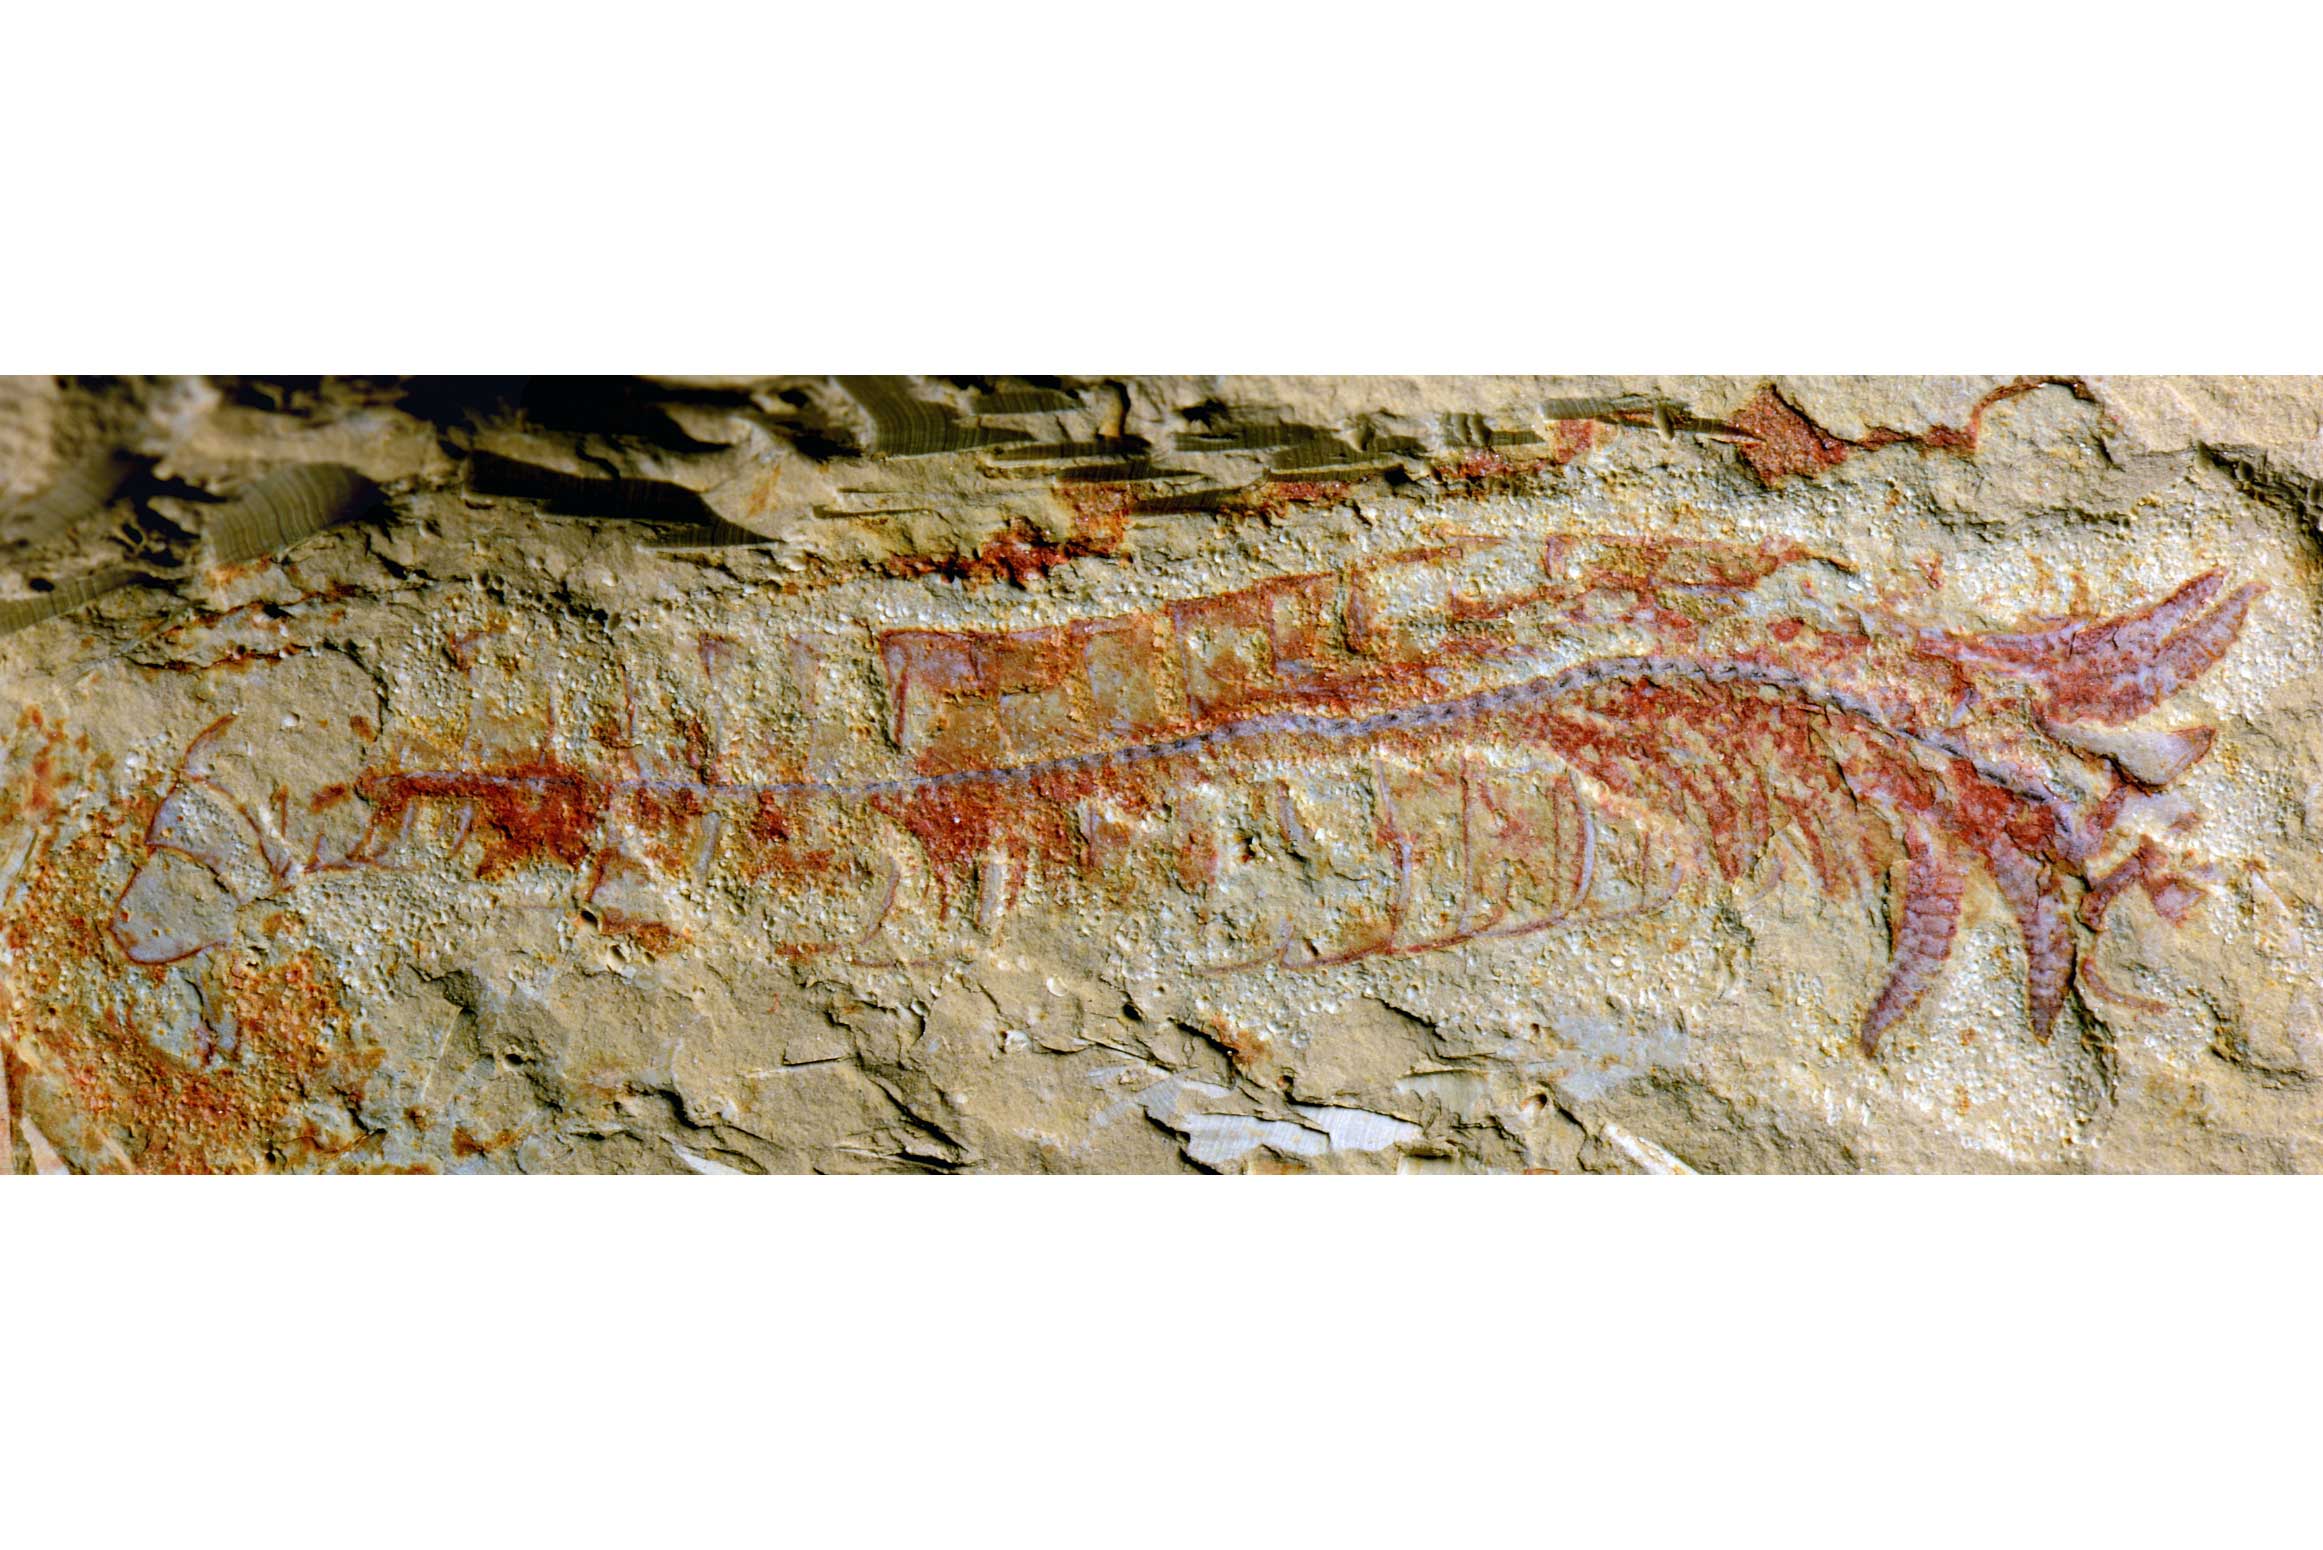 Oldest Nervous System Found in 520-Million-Year-Old Fossil 